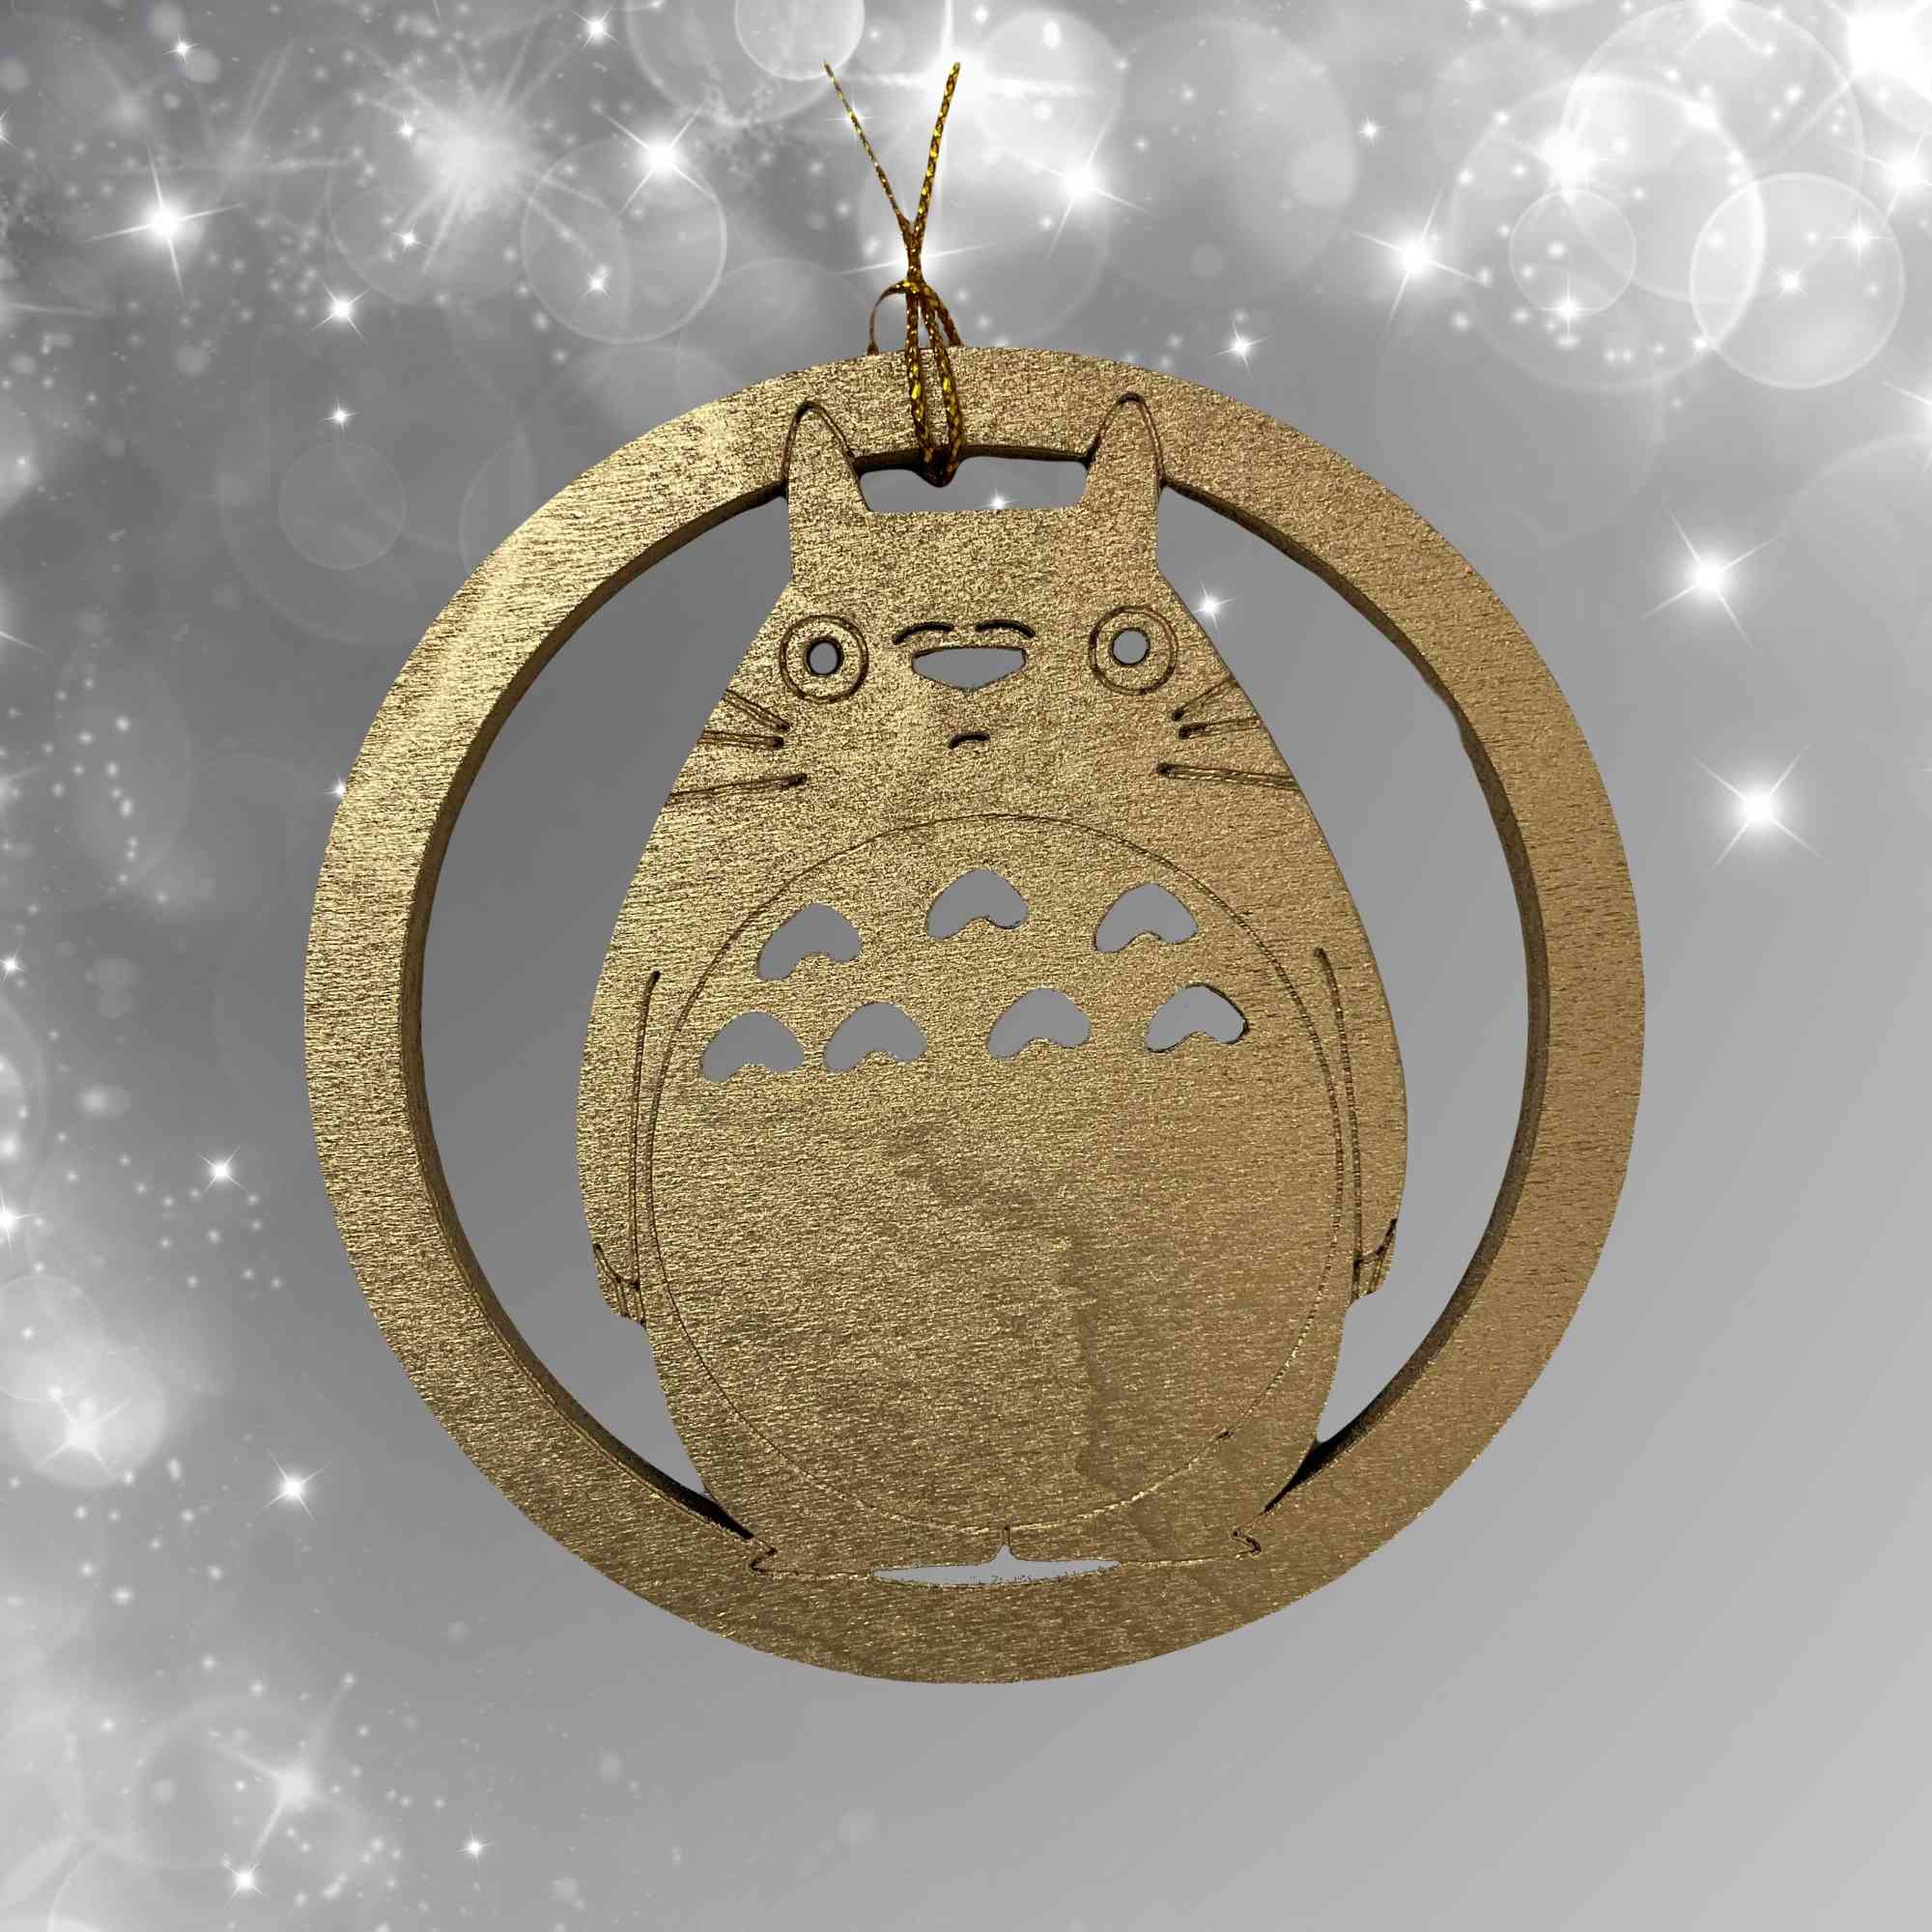 Totoro Ornament or Wine Bottle Gift Tag